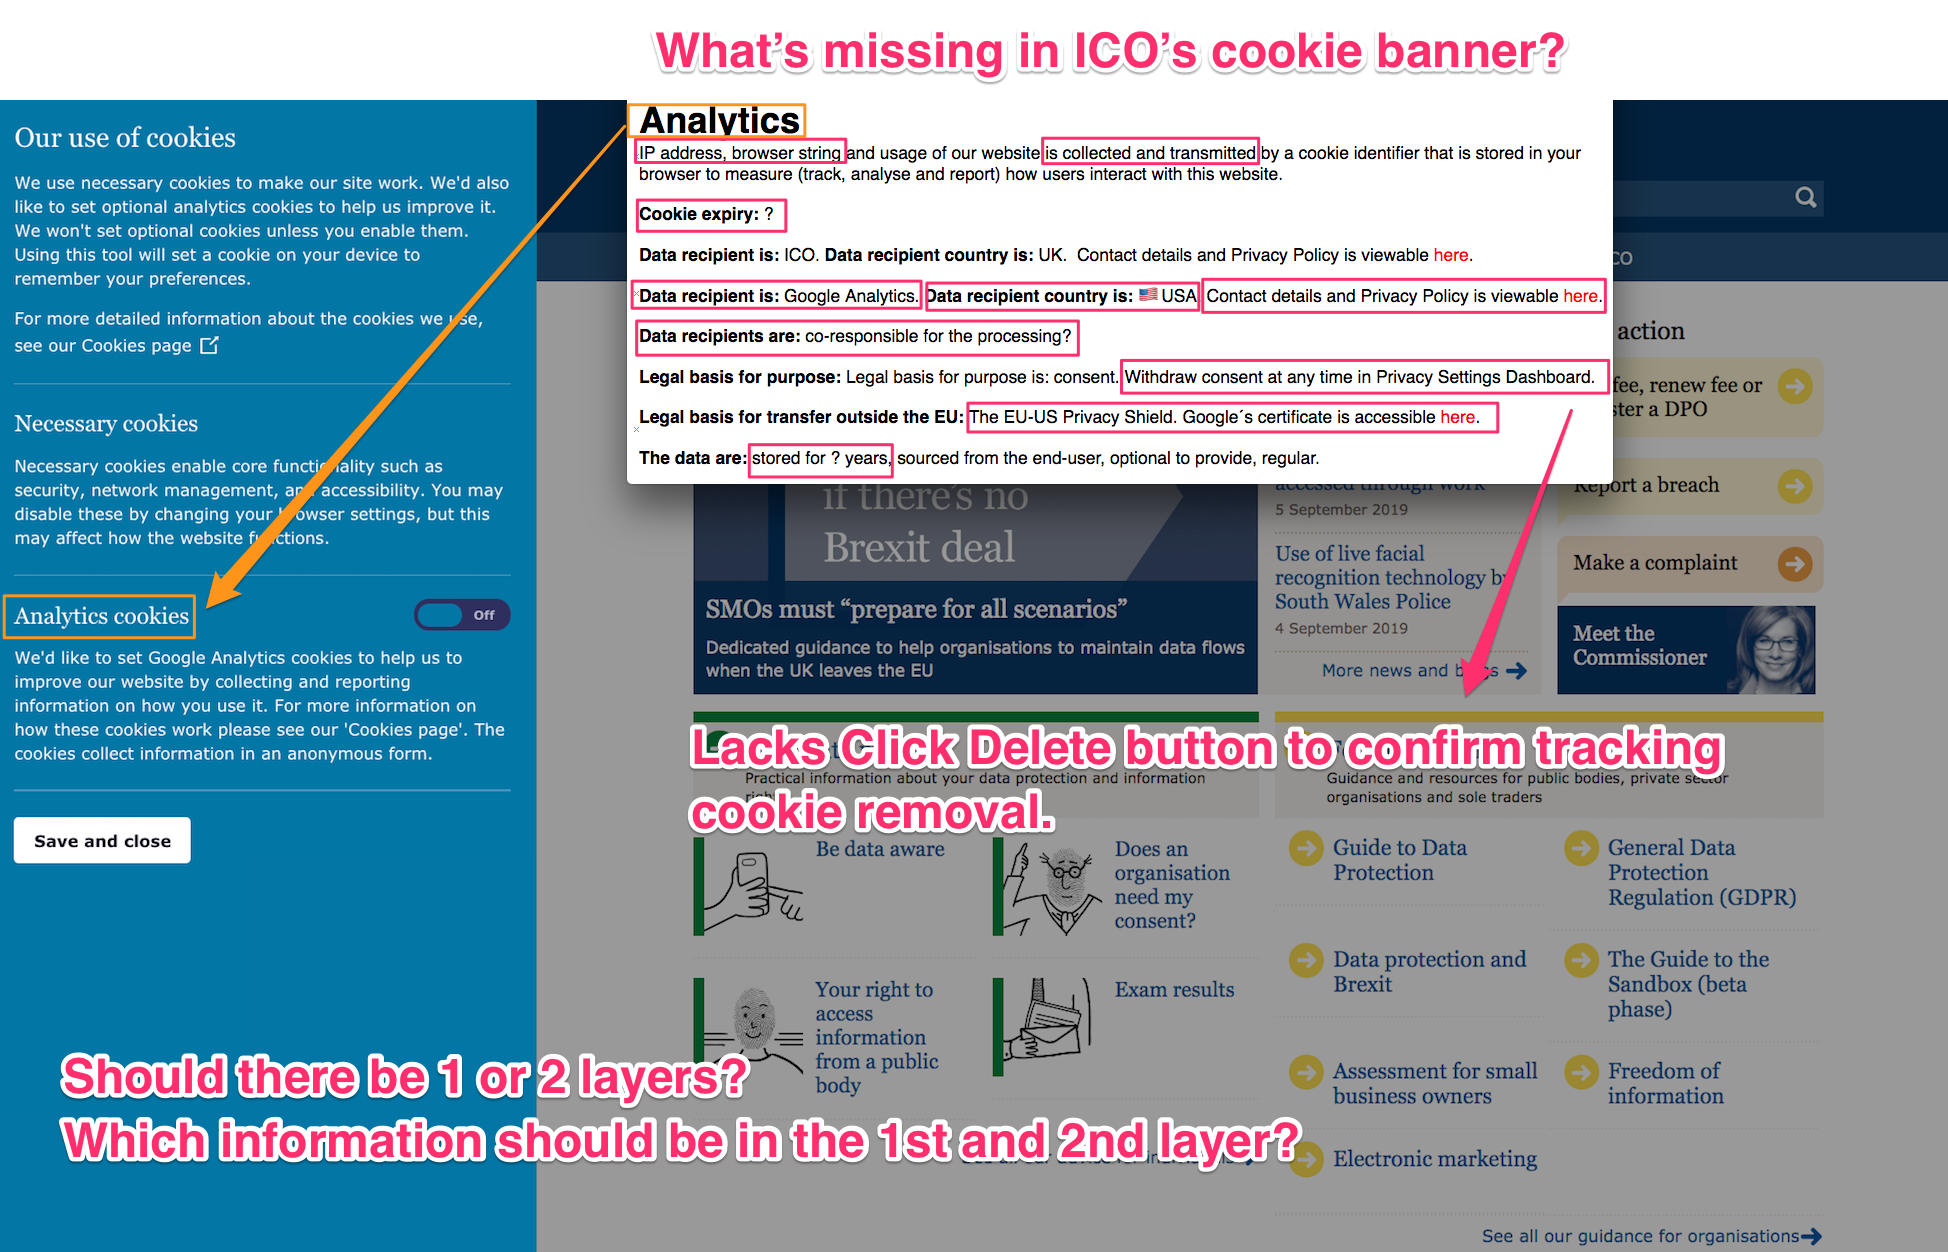 What’s (not) missing in ICO’s cookie banner?